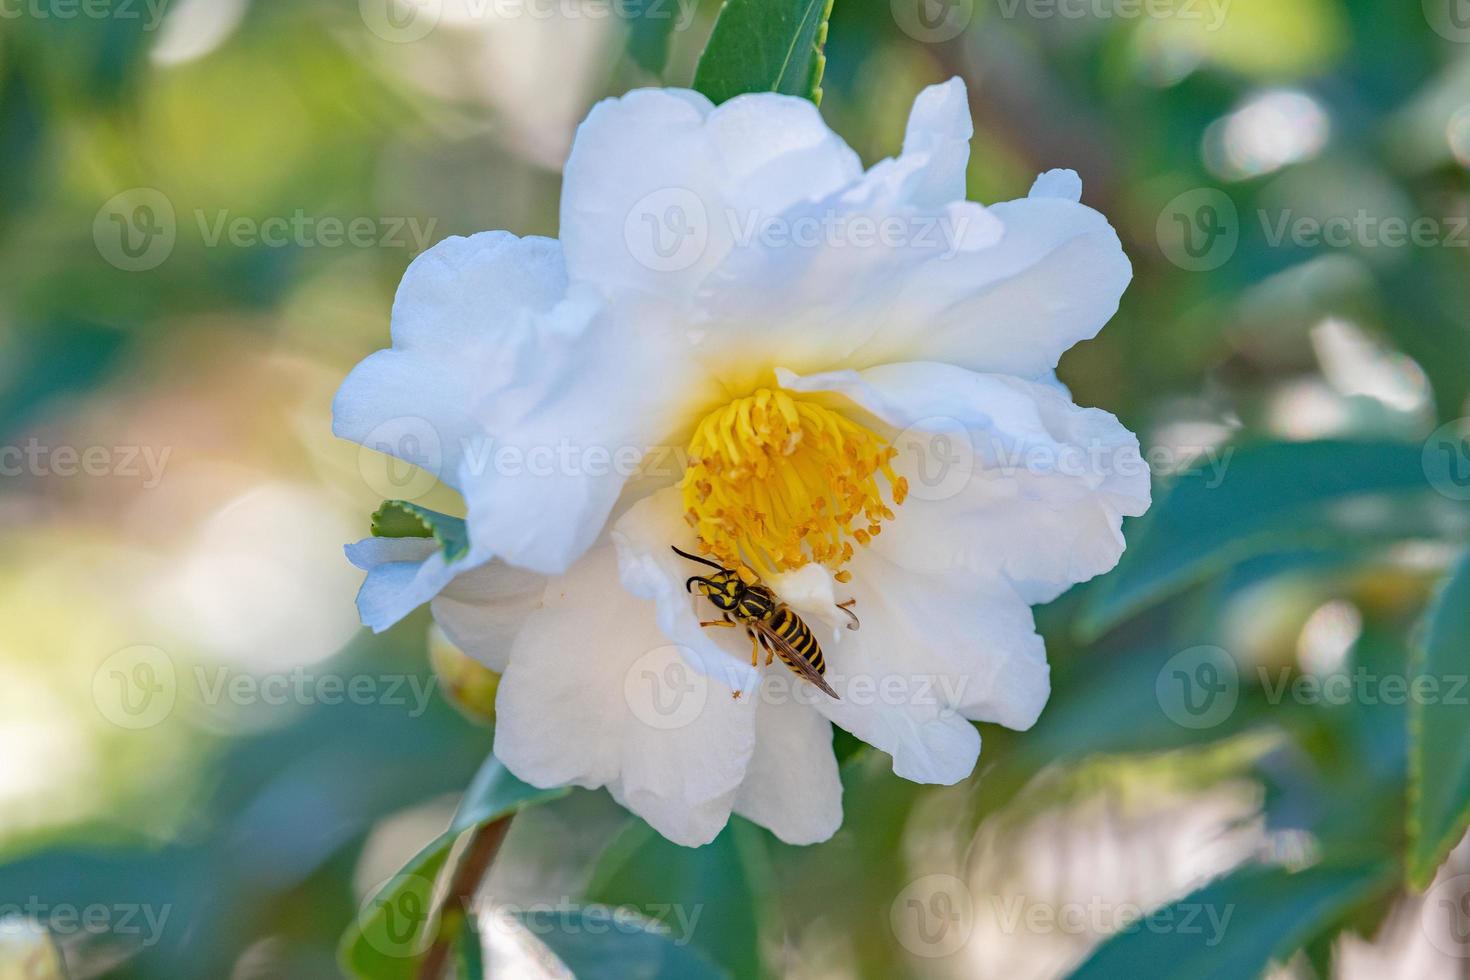 A yellow and black striped wasp finding nectar on a camellia flower in the garden. photo